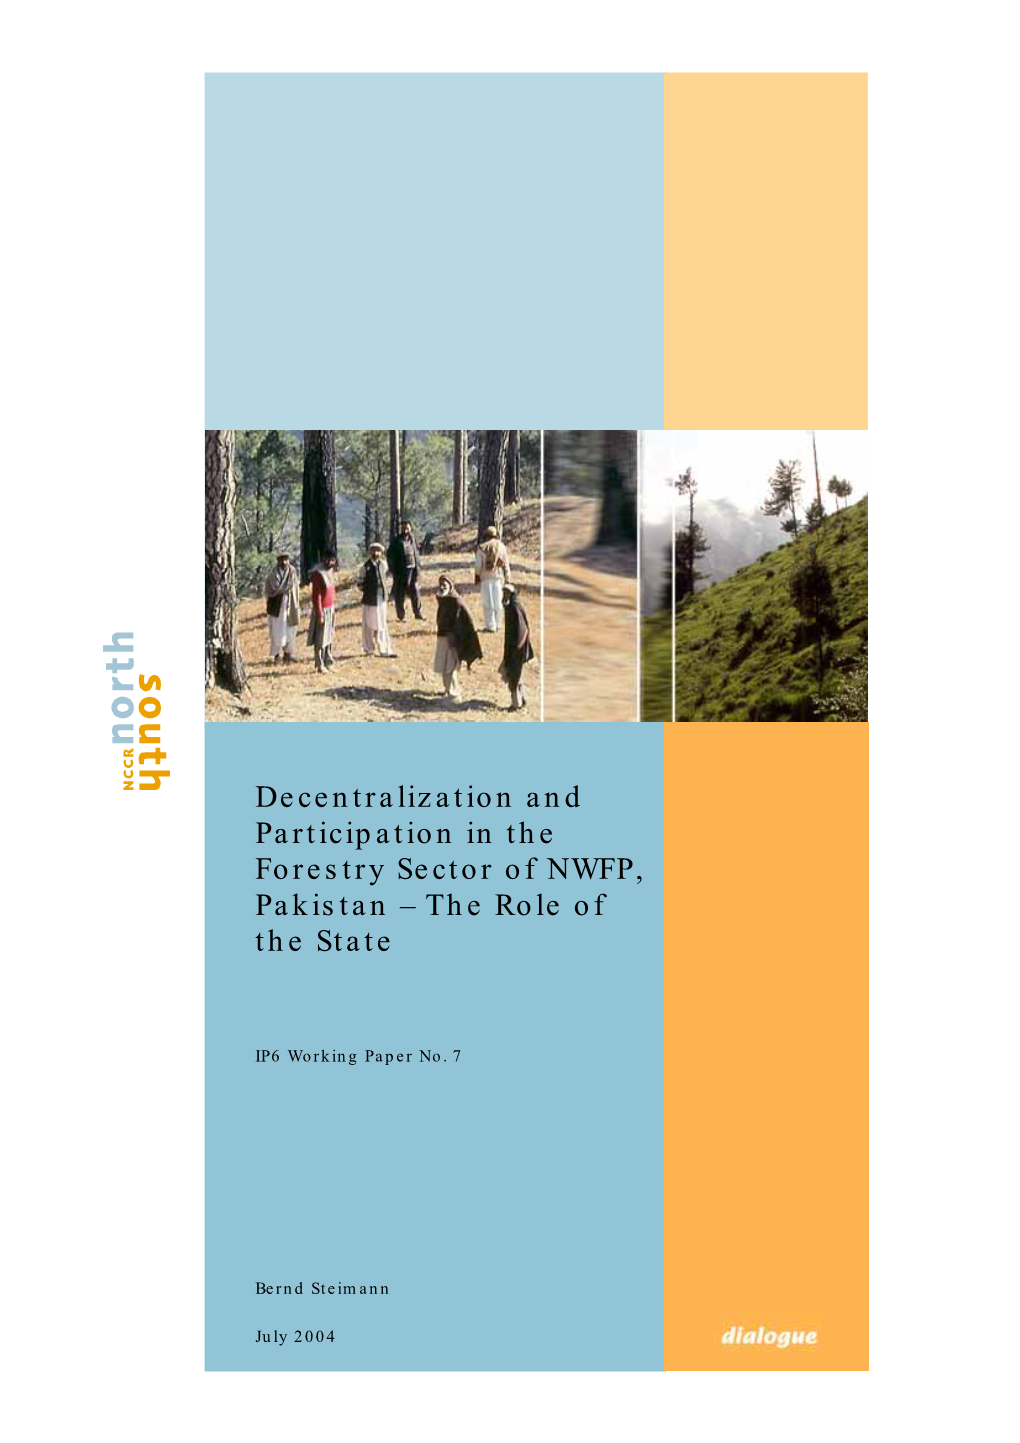 Decentralization and Participation in the Forestry Sector of NWFP, Pakistan – the Role of the State